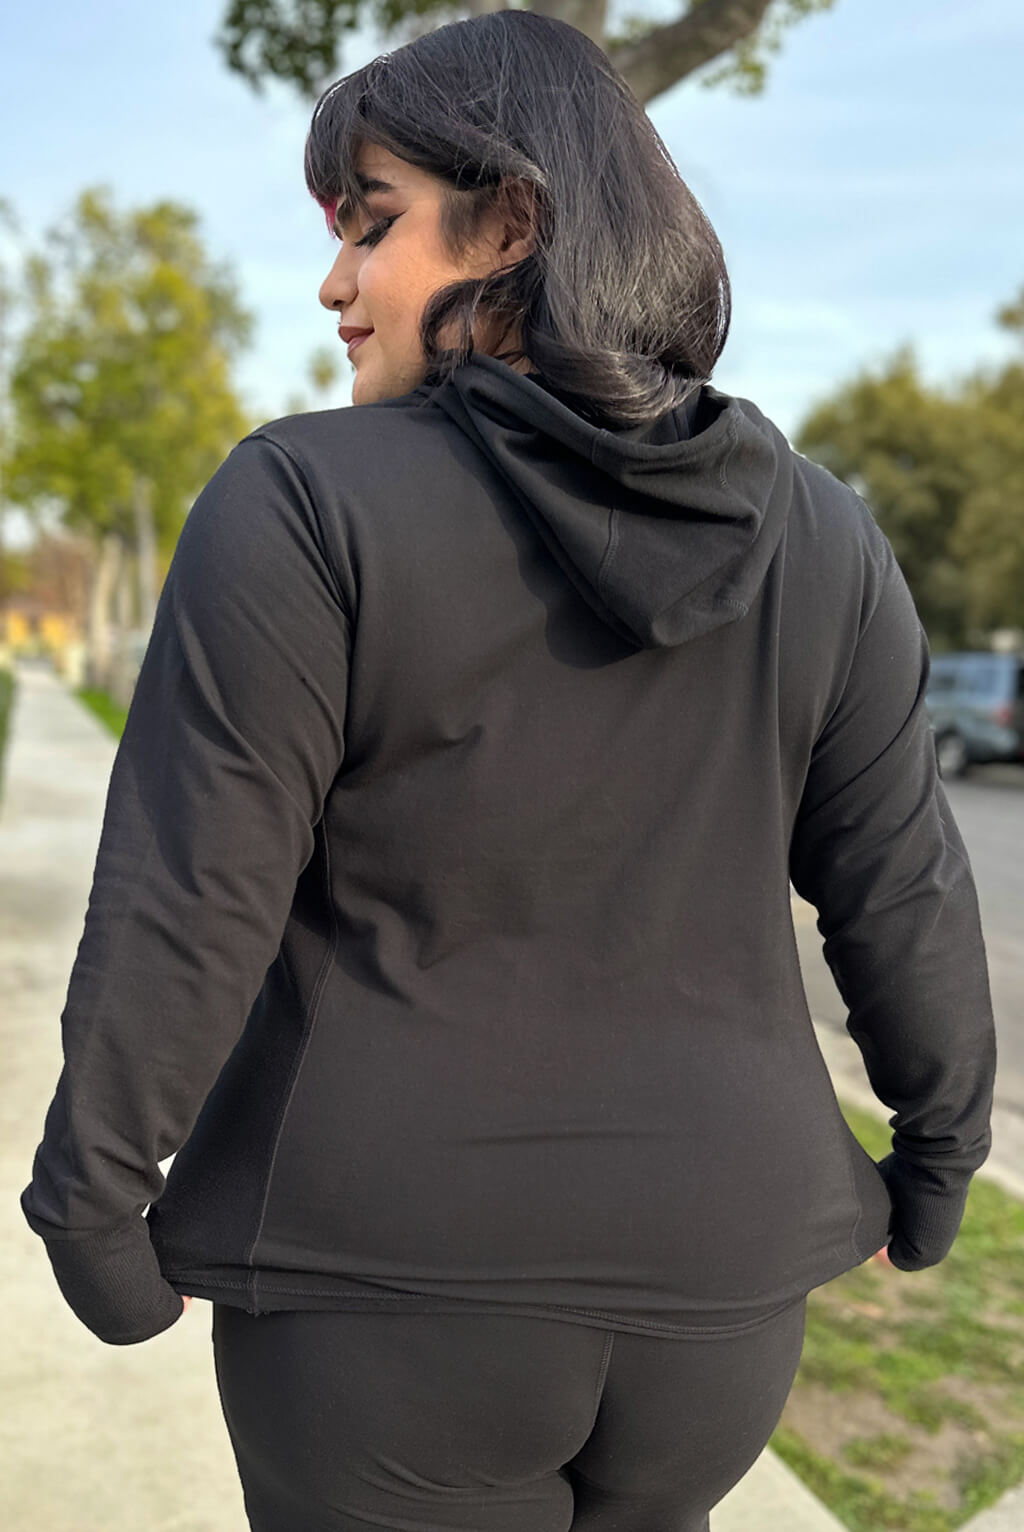 plus size womens zip up hoodie with long sleeves and thumbholes